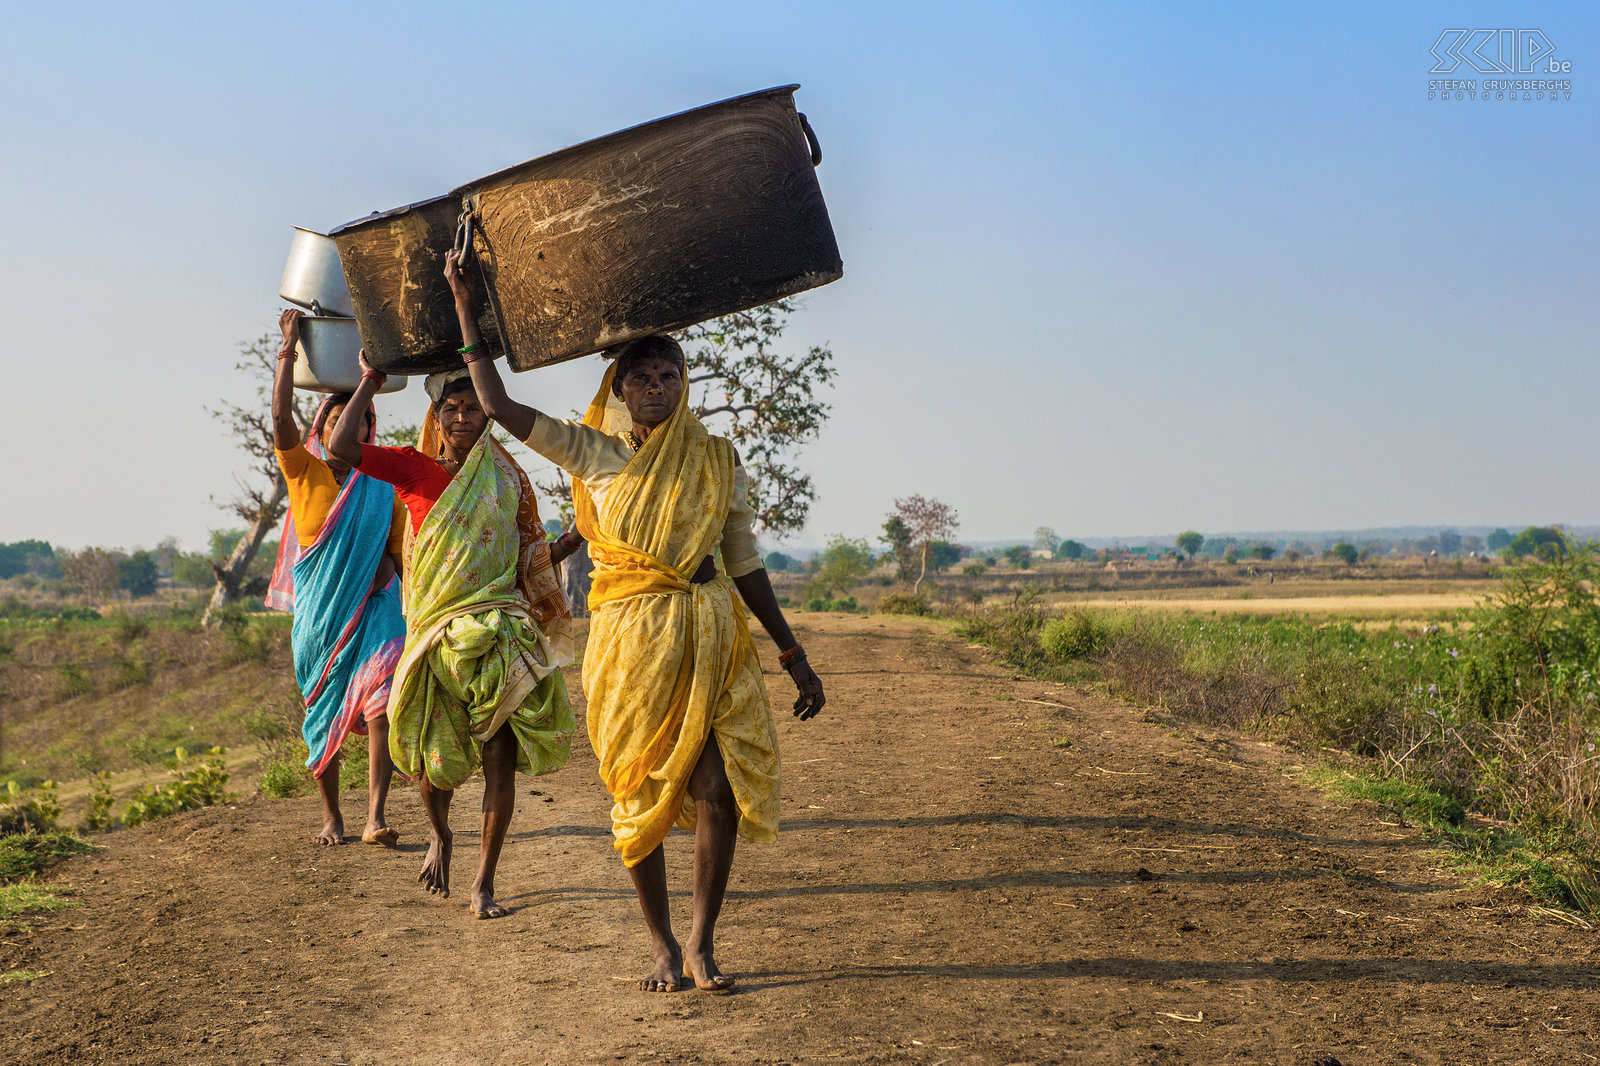 Tadoba - Gond women In a little rural village near Tadoba national park a group of colorful women are carrying very big fire pots on their head. The pots contain their cutlery and pans and they are going to the nearby lake to wash them. Stefan Cruysberghs